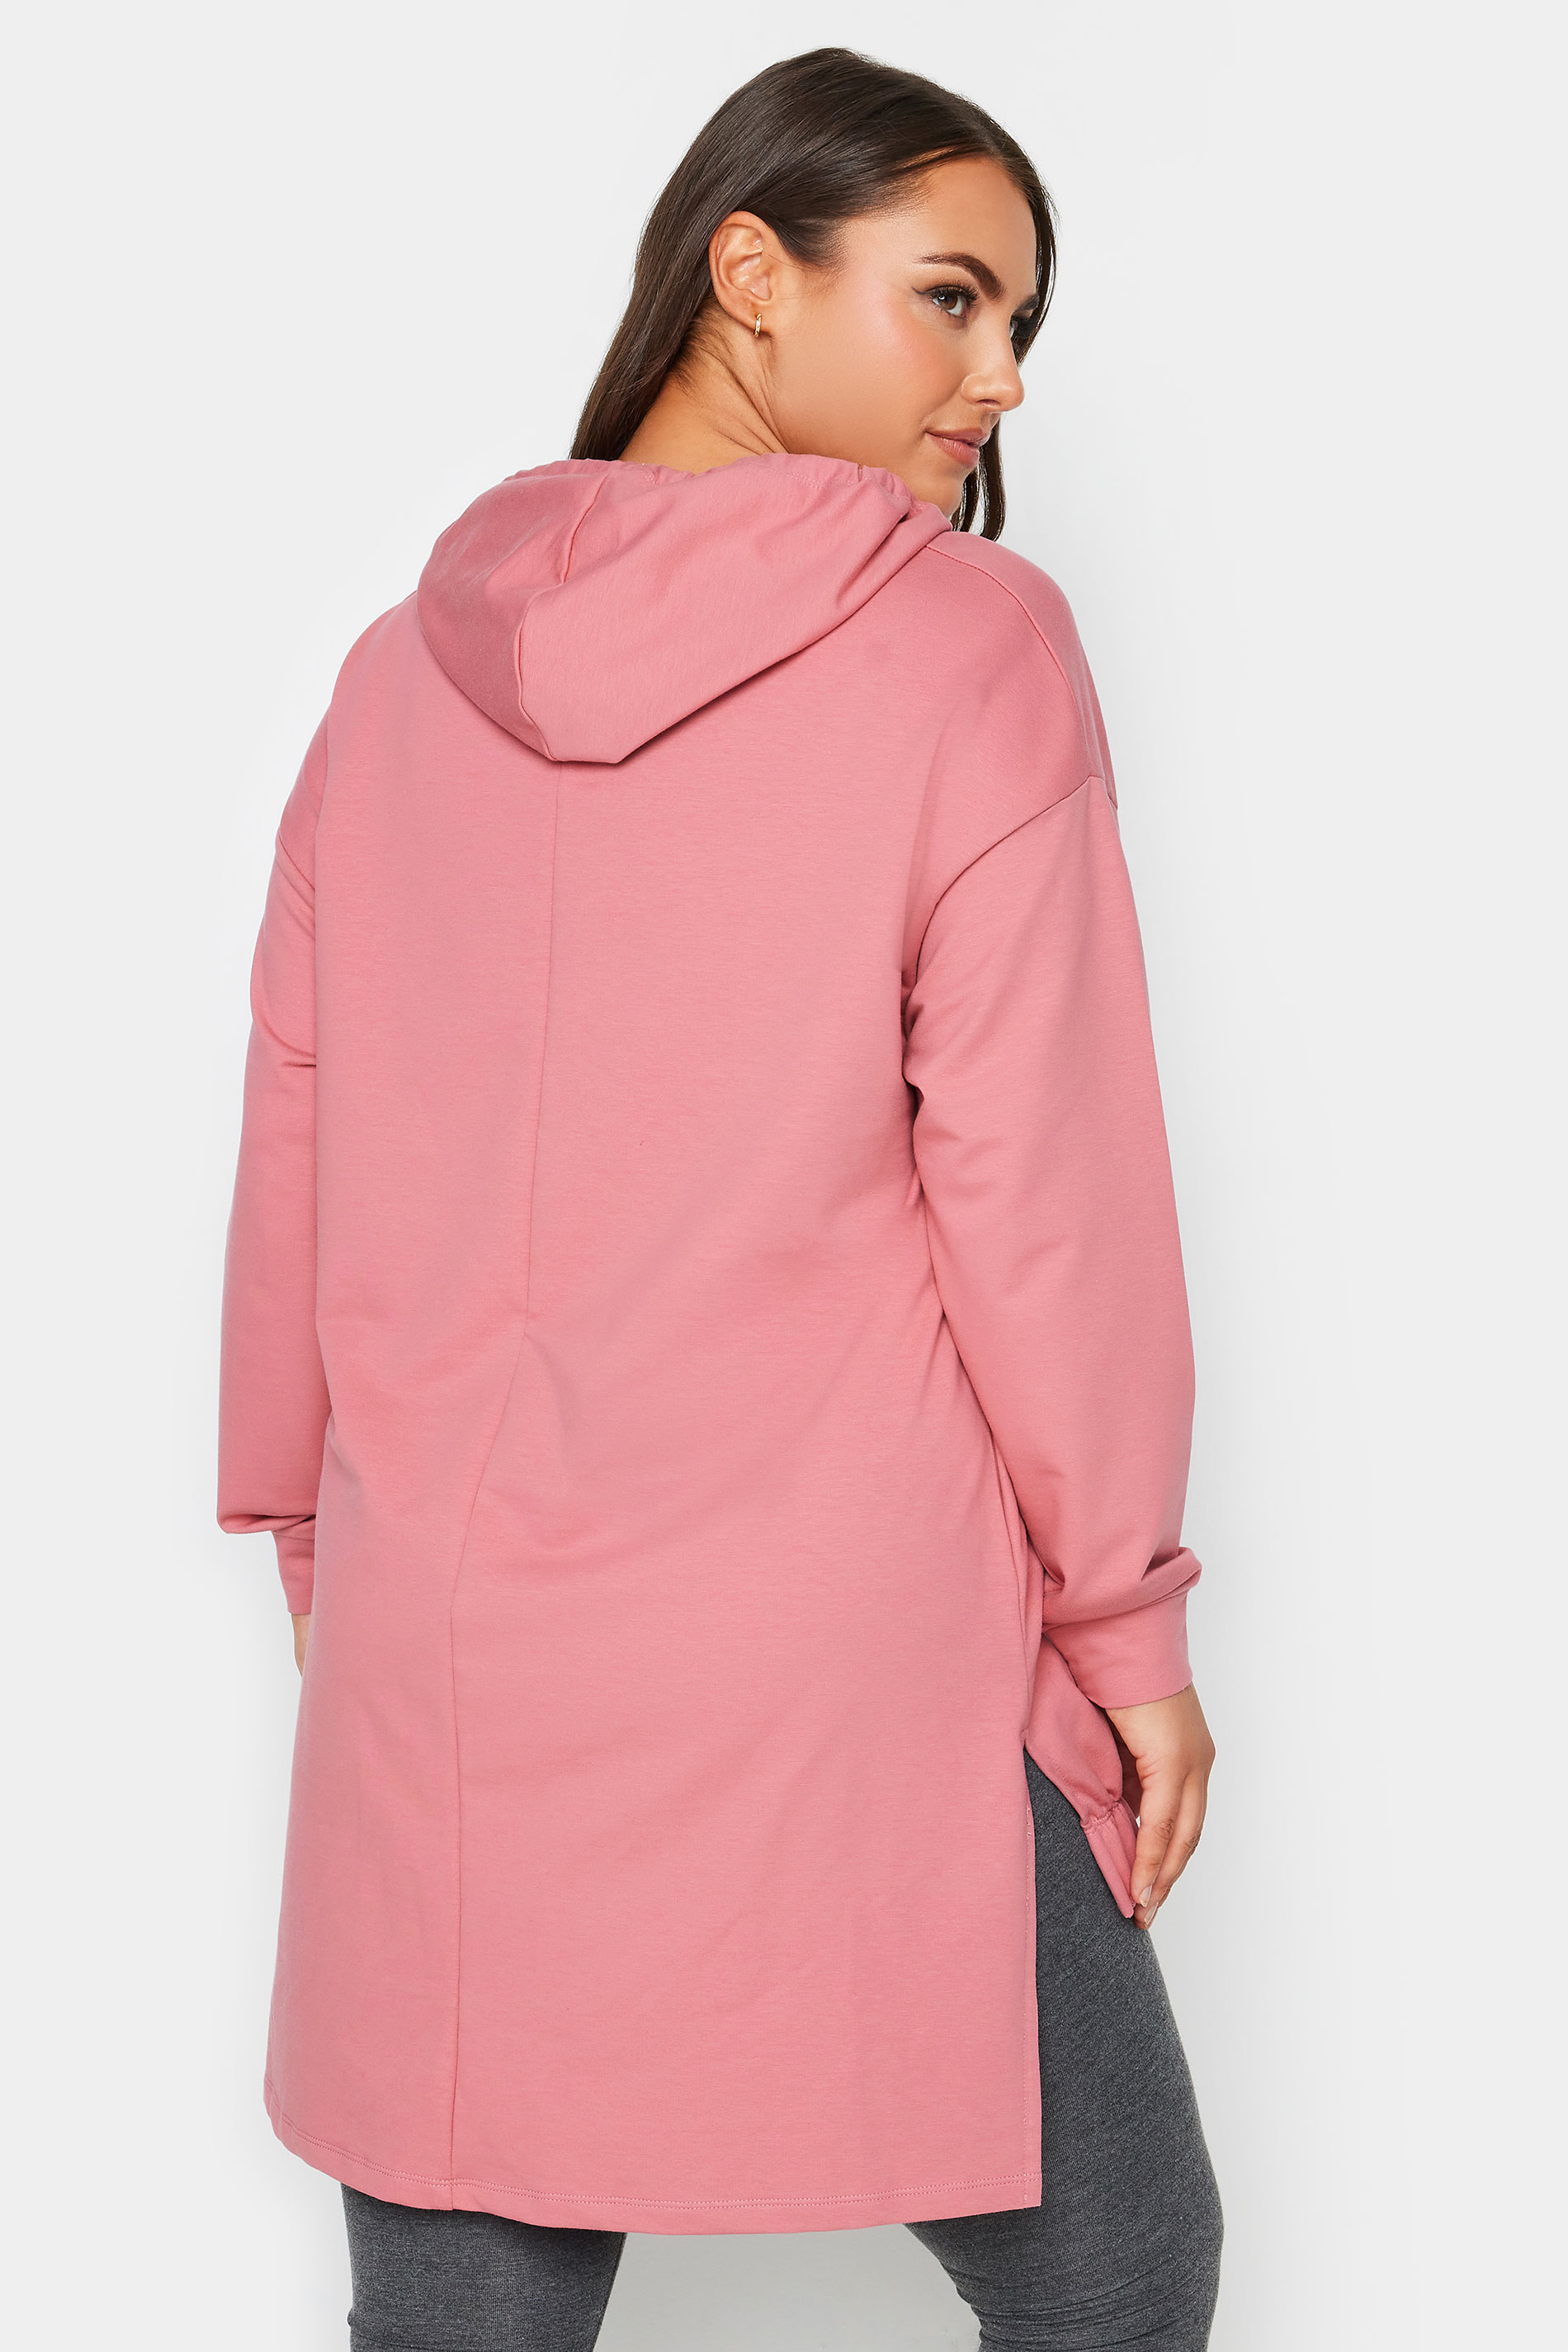 YOURS Plus Size Pink Embellished Tie Hoodie | Yours Clothing 3